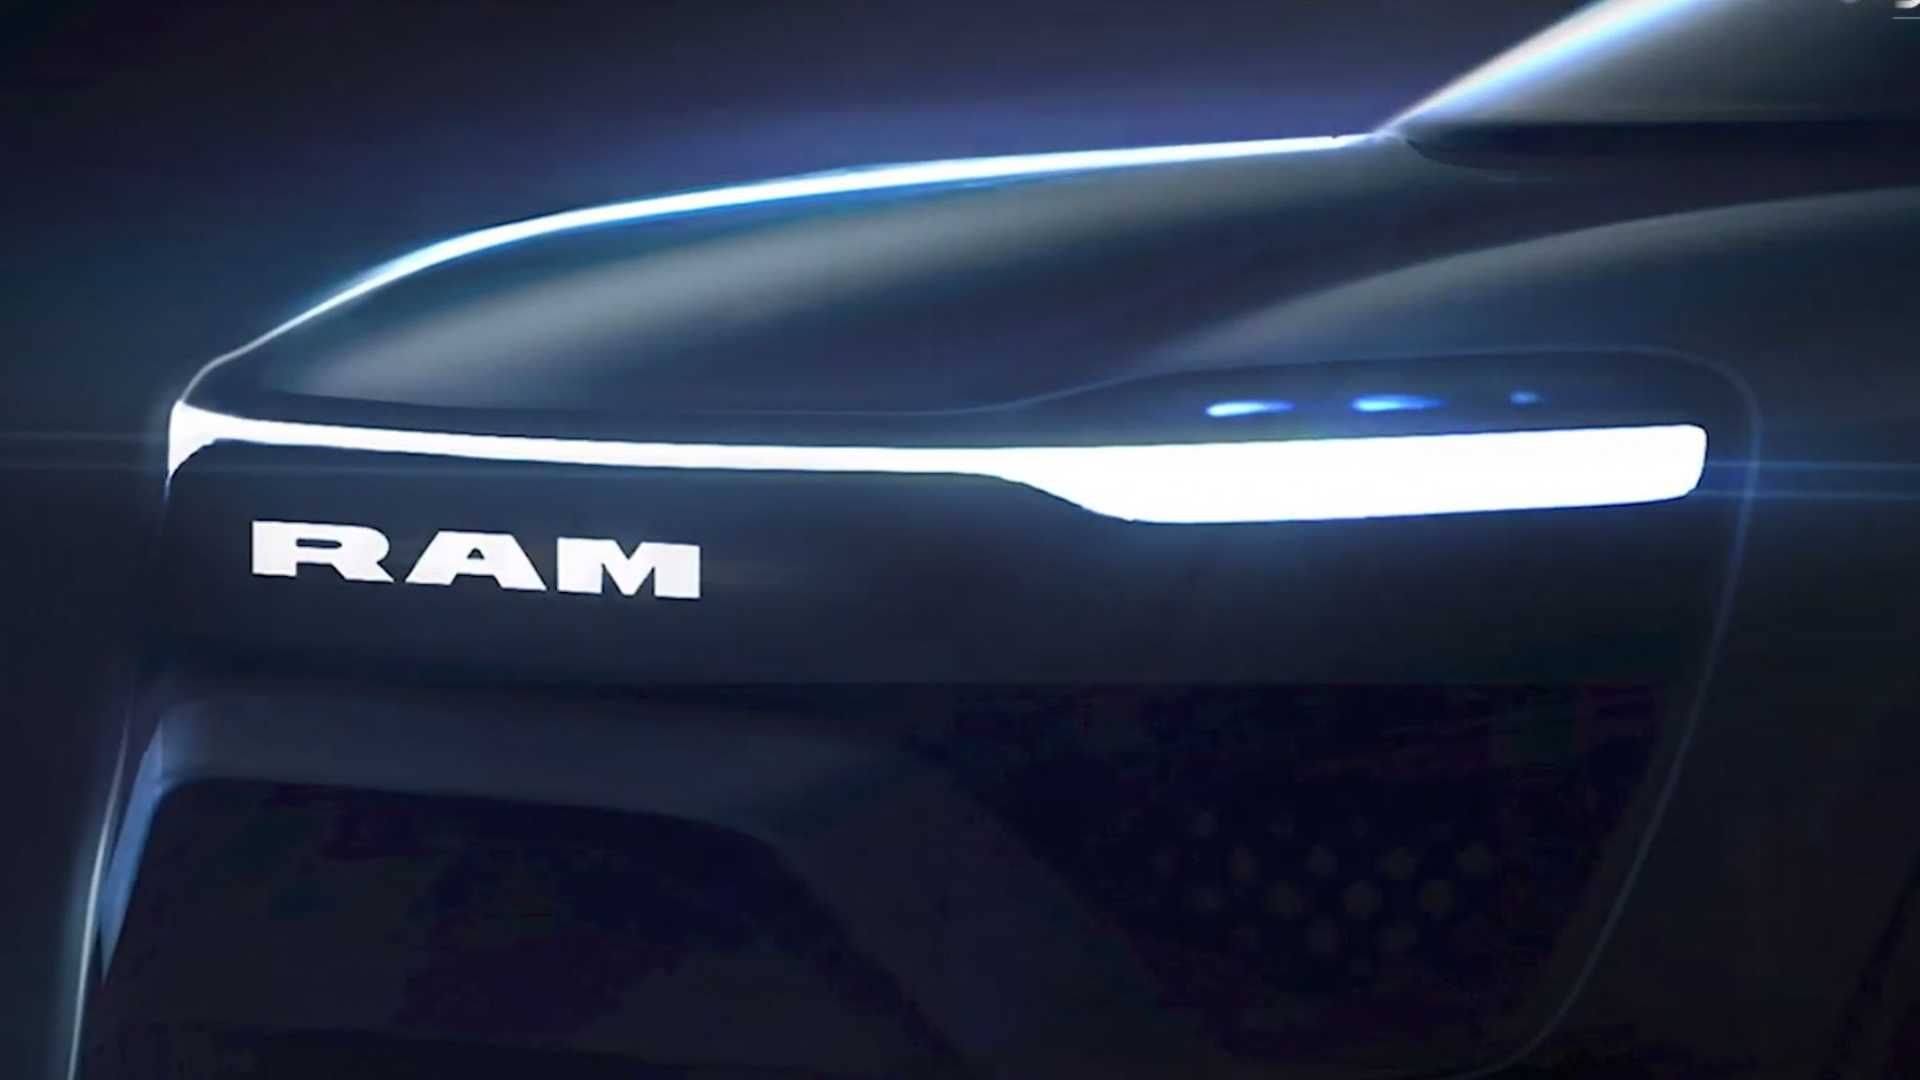 The front light of the RAM 1500 EV visualised